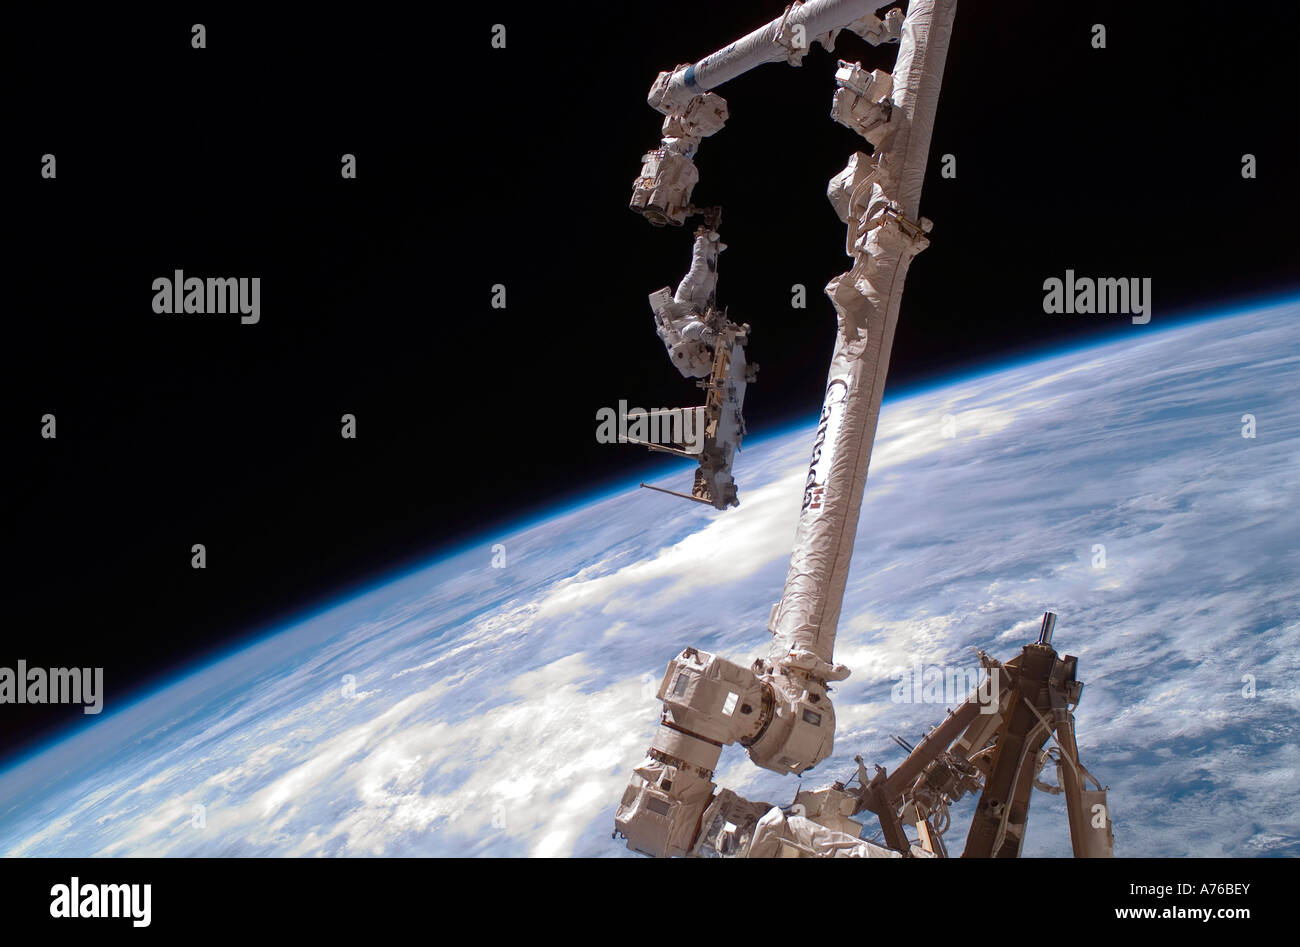 December 14, 2006 - An astronaut anchored to the International Space Station's Canadarm2 foot restraint. Stock Photo